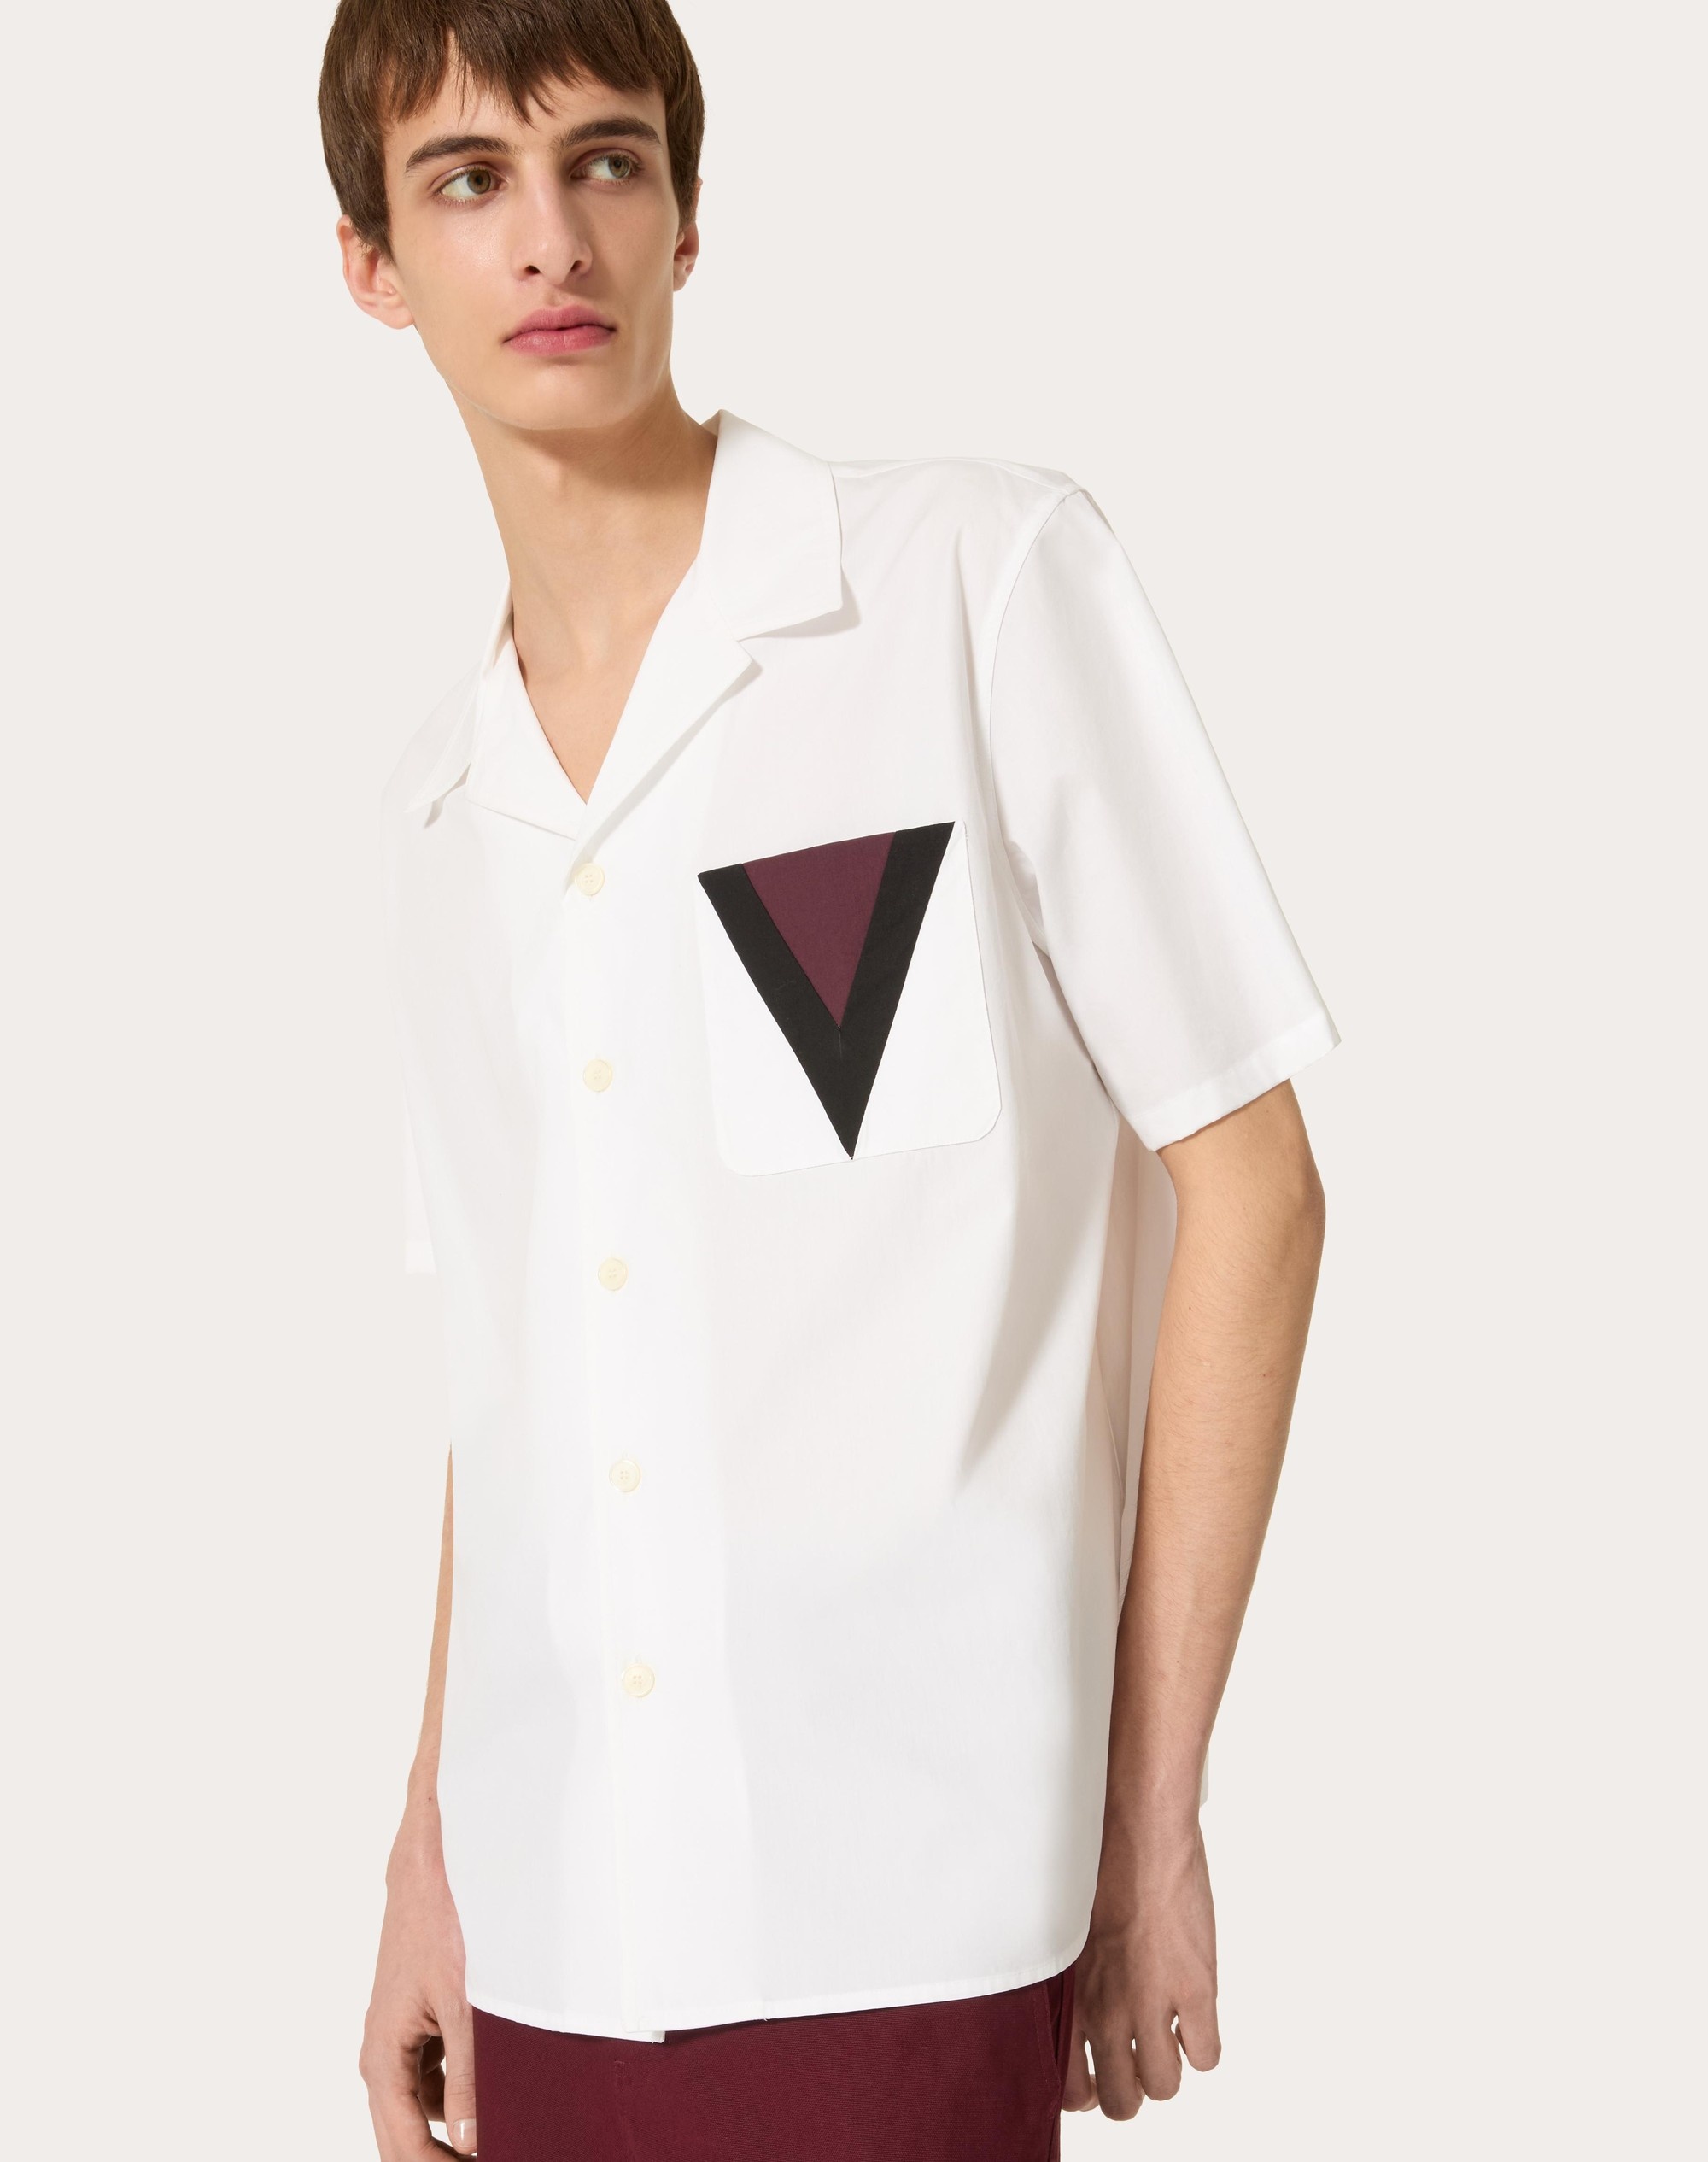 COTTON BOWLING SHIRT WITH INLAID V DETAIL - 5